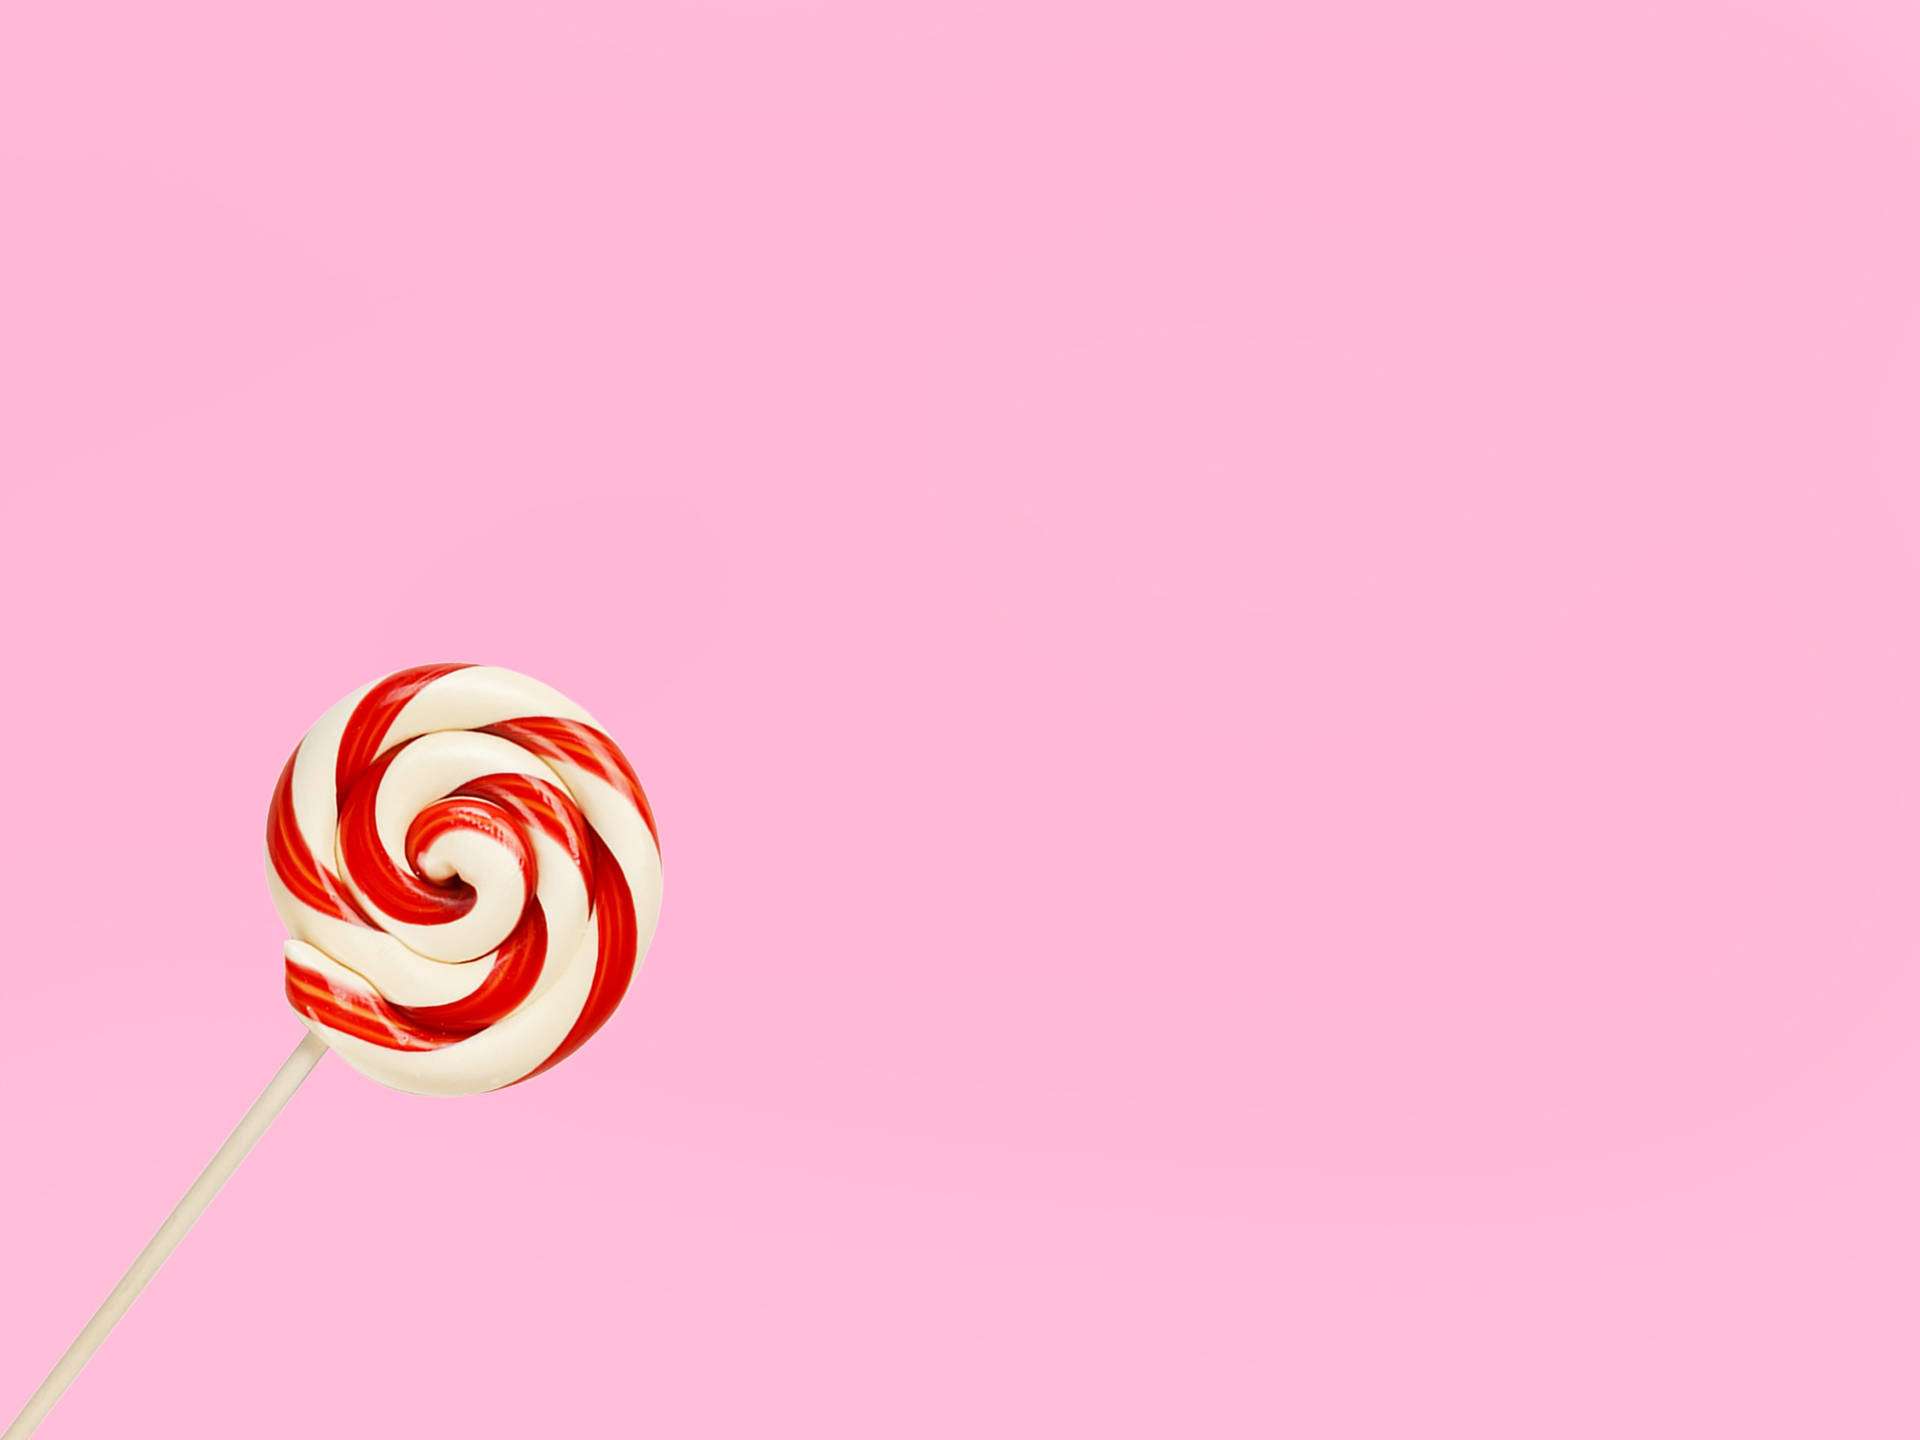 Red And White Lollipop On Pink Background Wallpaper